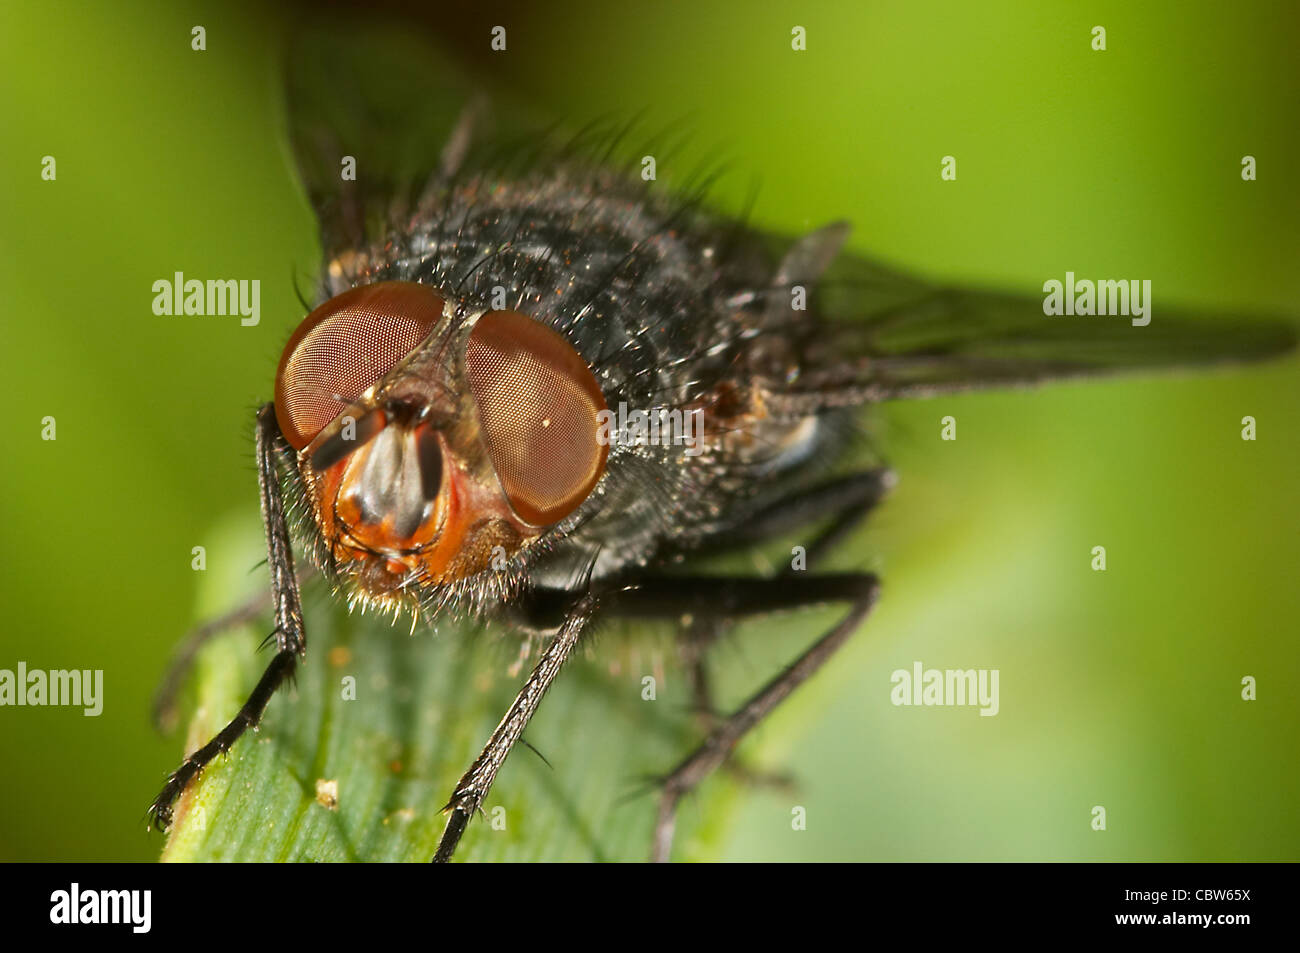 Little Blowfly ( sarcophaga carnaria ) on a little branch Stock Photo